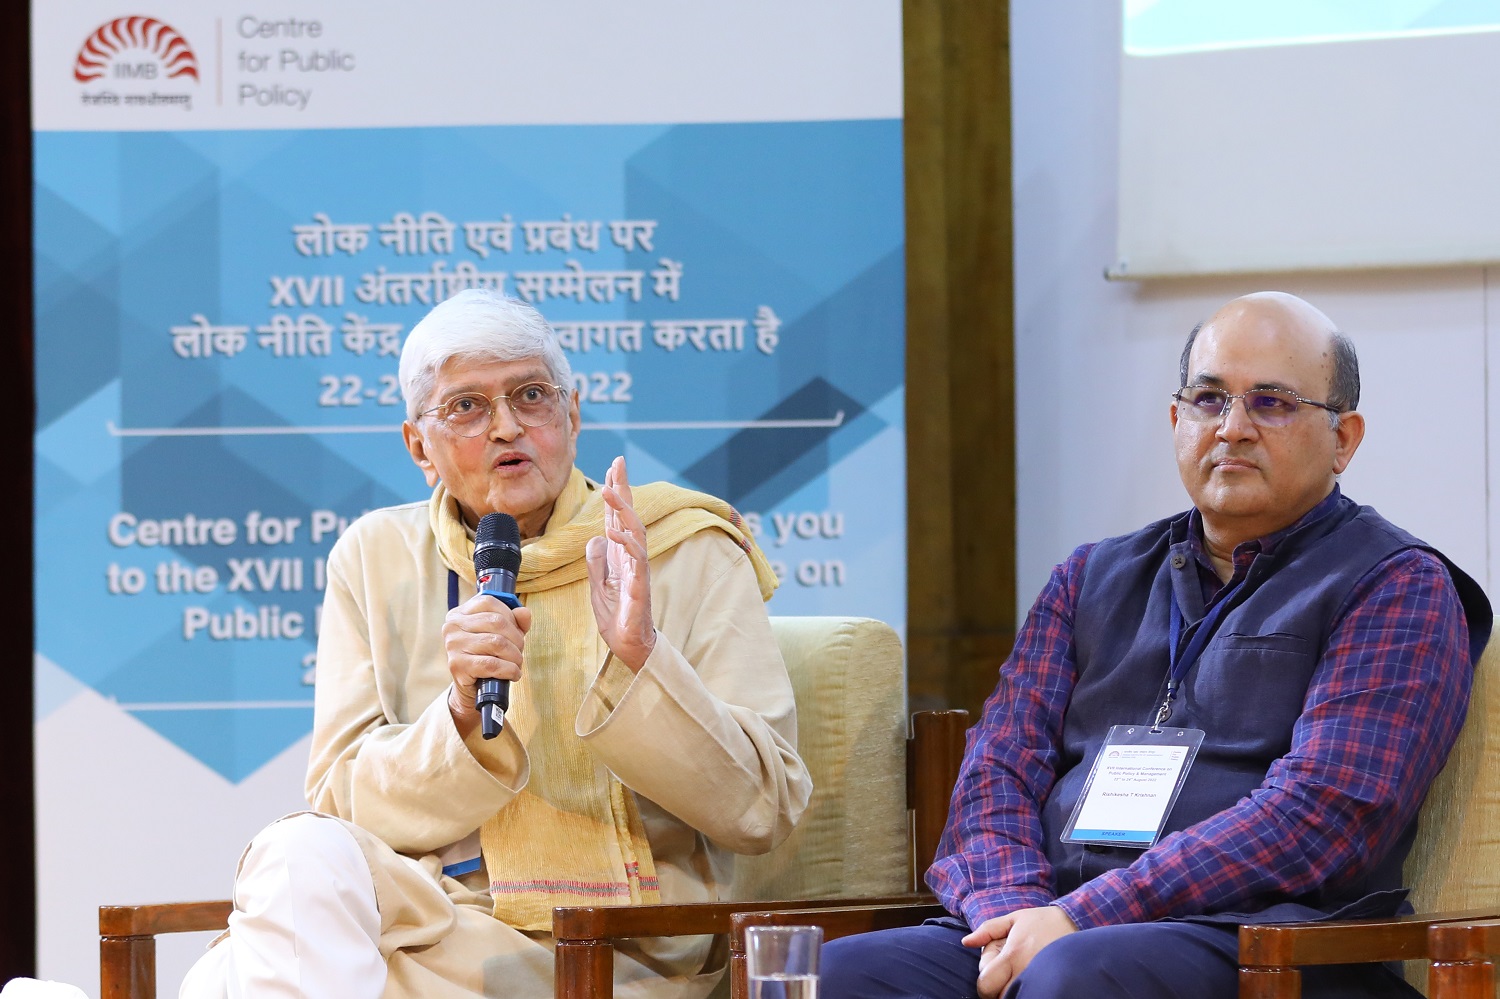 Shri Gopalkrishna Gandhi delivers the inaugural address at the XVII International Conference on Public Policy & Management at IIM Bangalore on 22nd August 2022. The conference is organized annually by the Centre for Public Policy at IIM Bangalore.